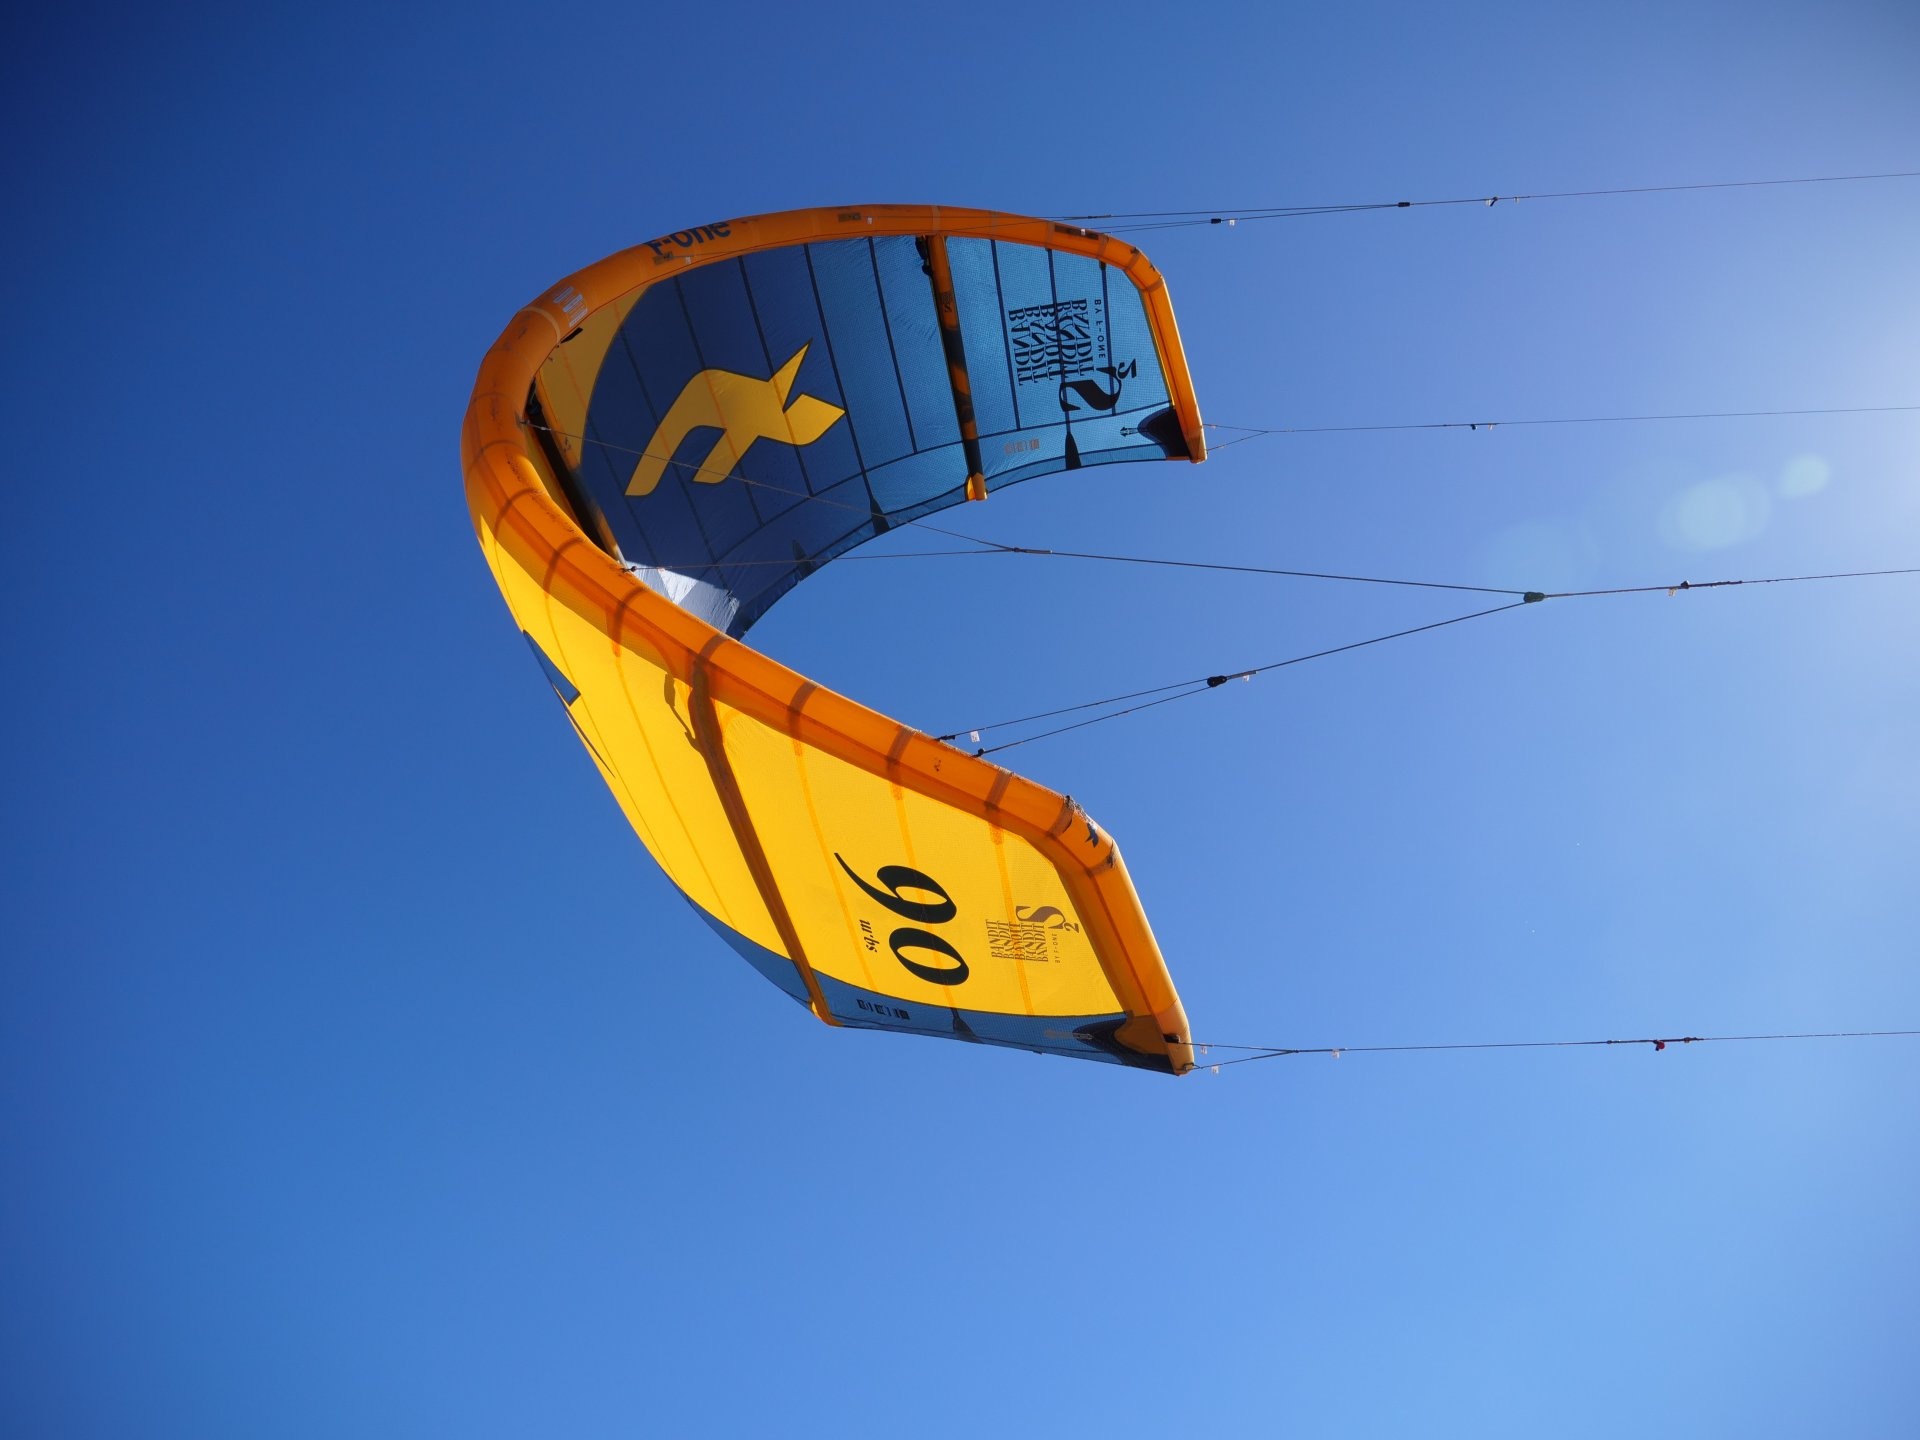 Kiteboarding: F-ONE Kiteboarding Bandit S2, A 3 strut delta C kite, A compact pulled bridle system. 1920x1440 HD Wallpaper.